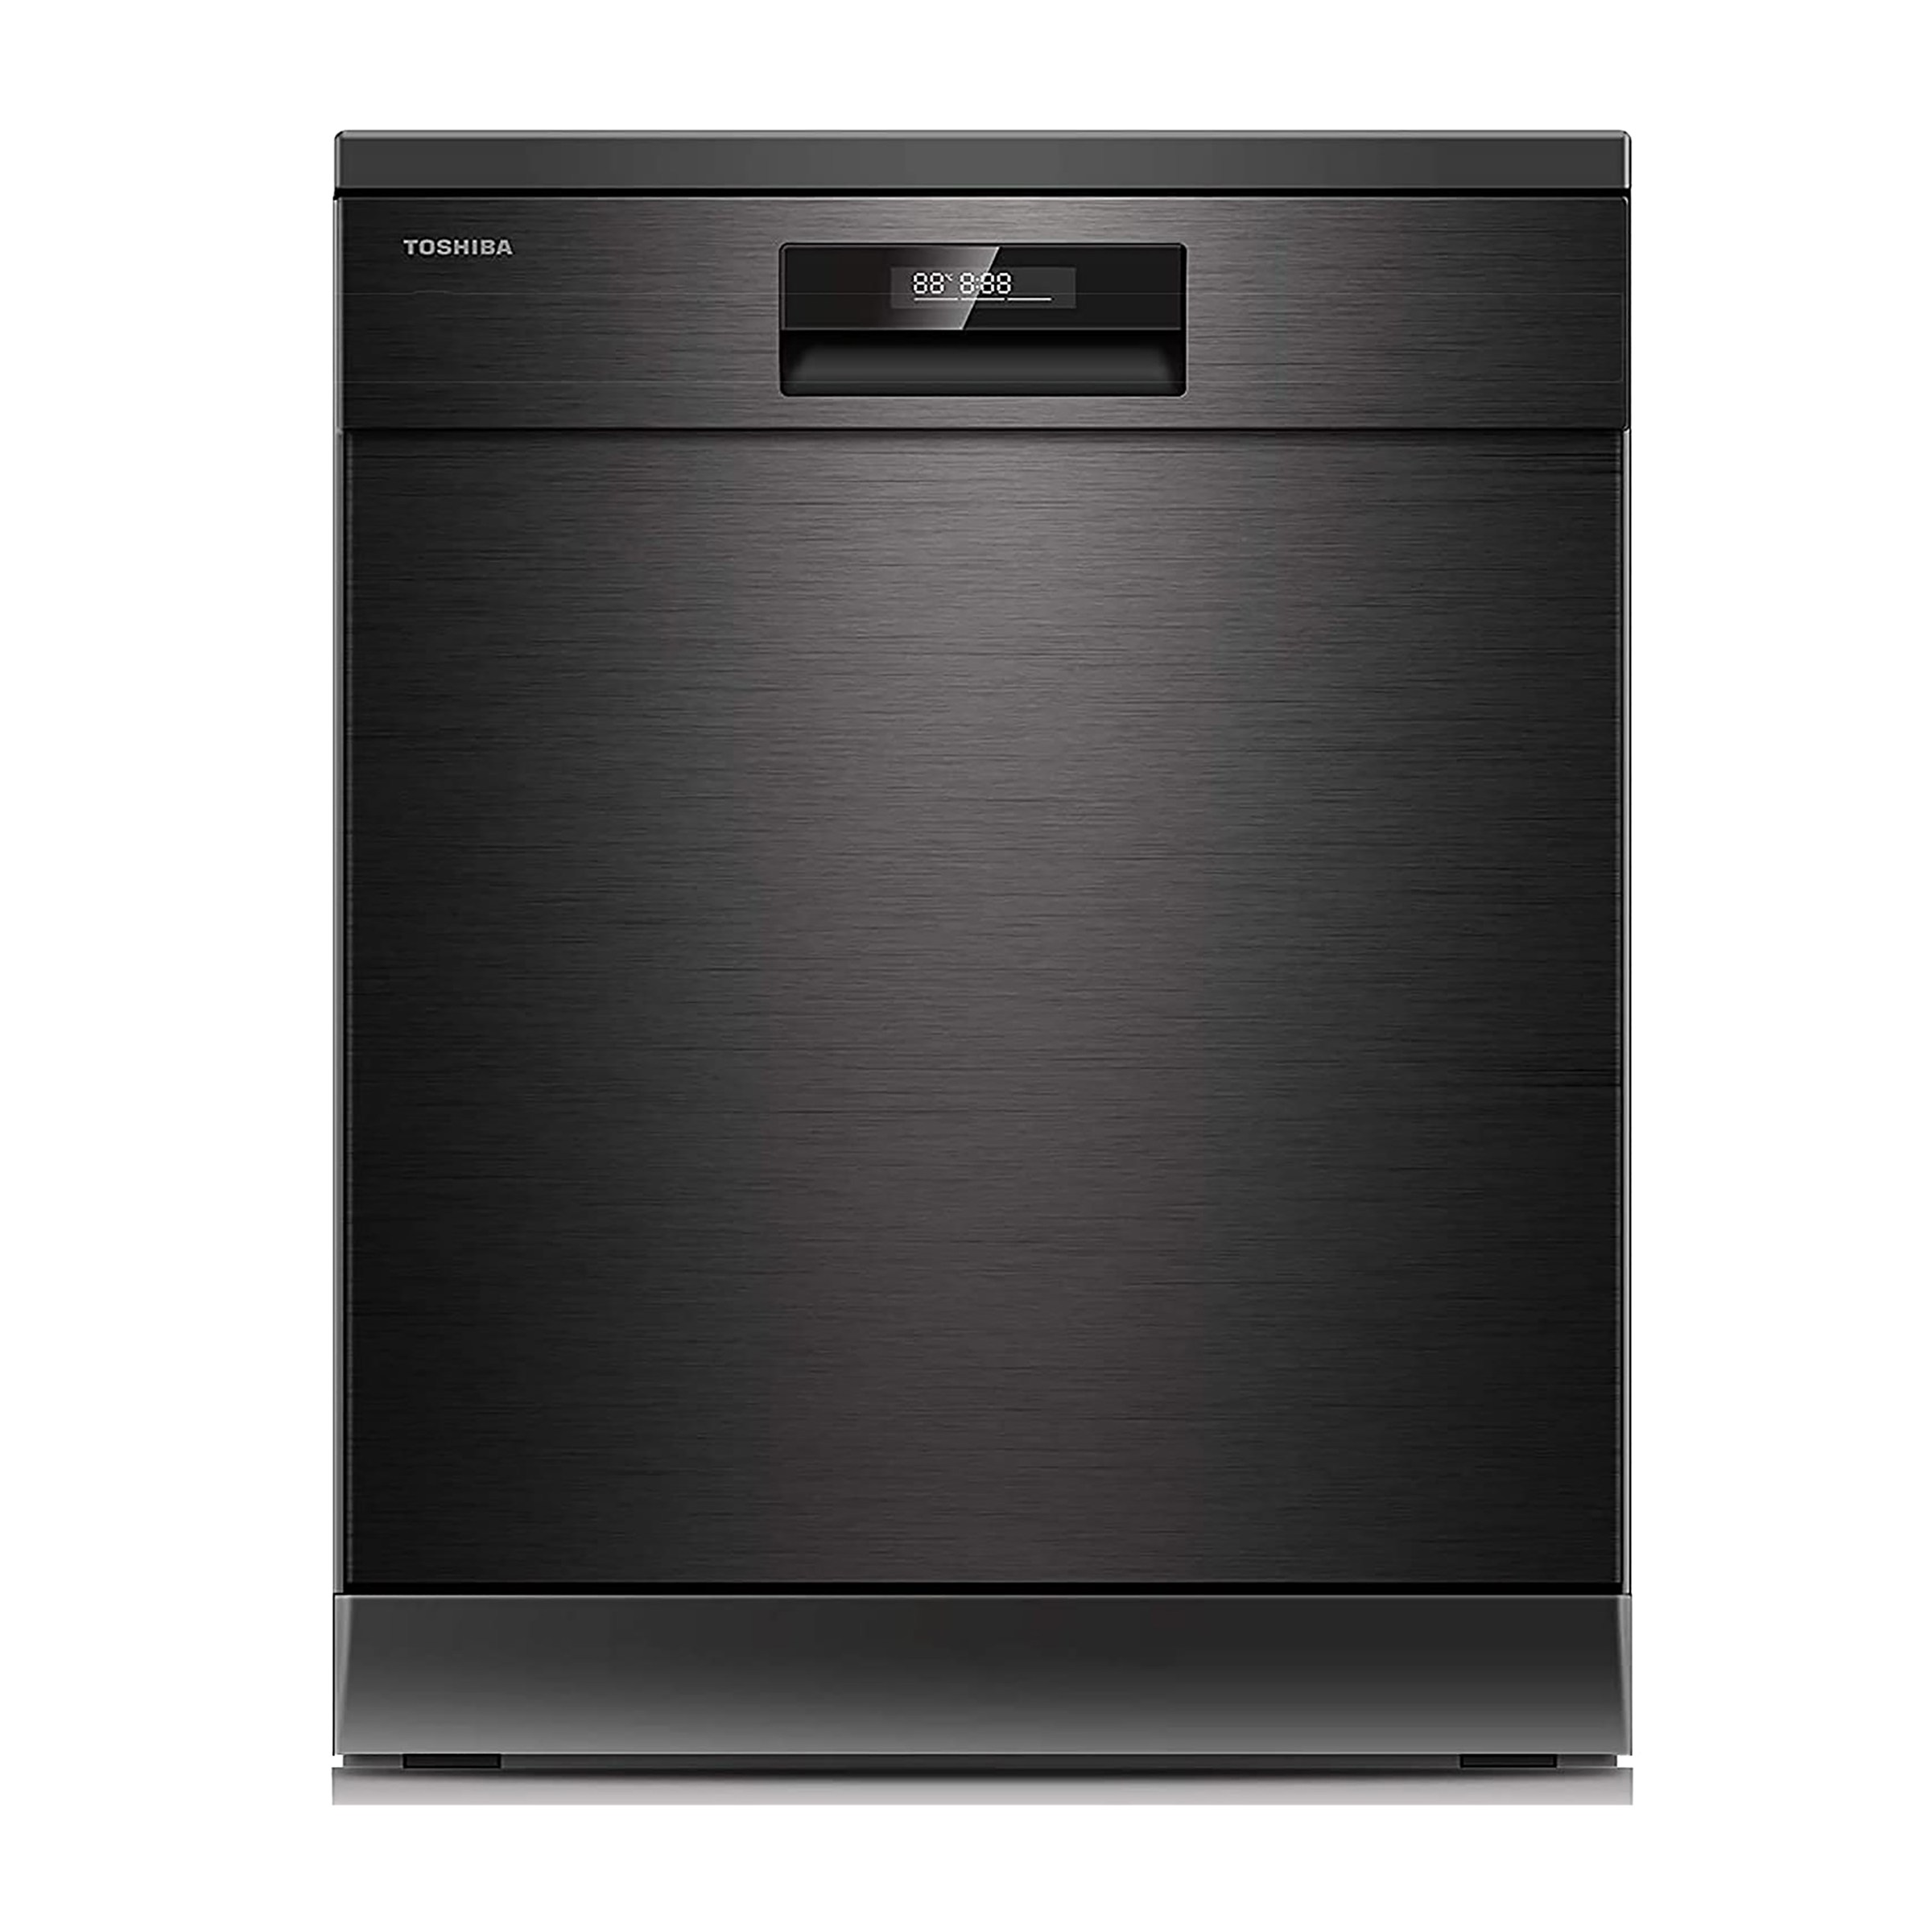 Toshiba 15 Place Setting Freestanding Dishwasher (Antibacterial Filter, DW-15F2(BS)-IN, Black)